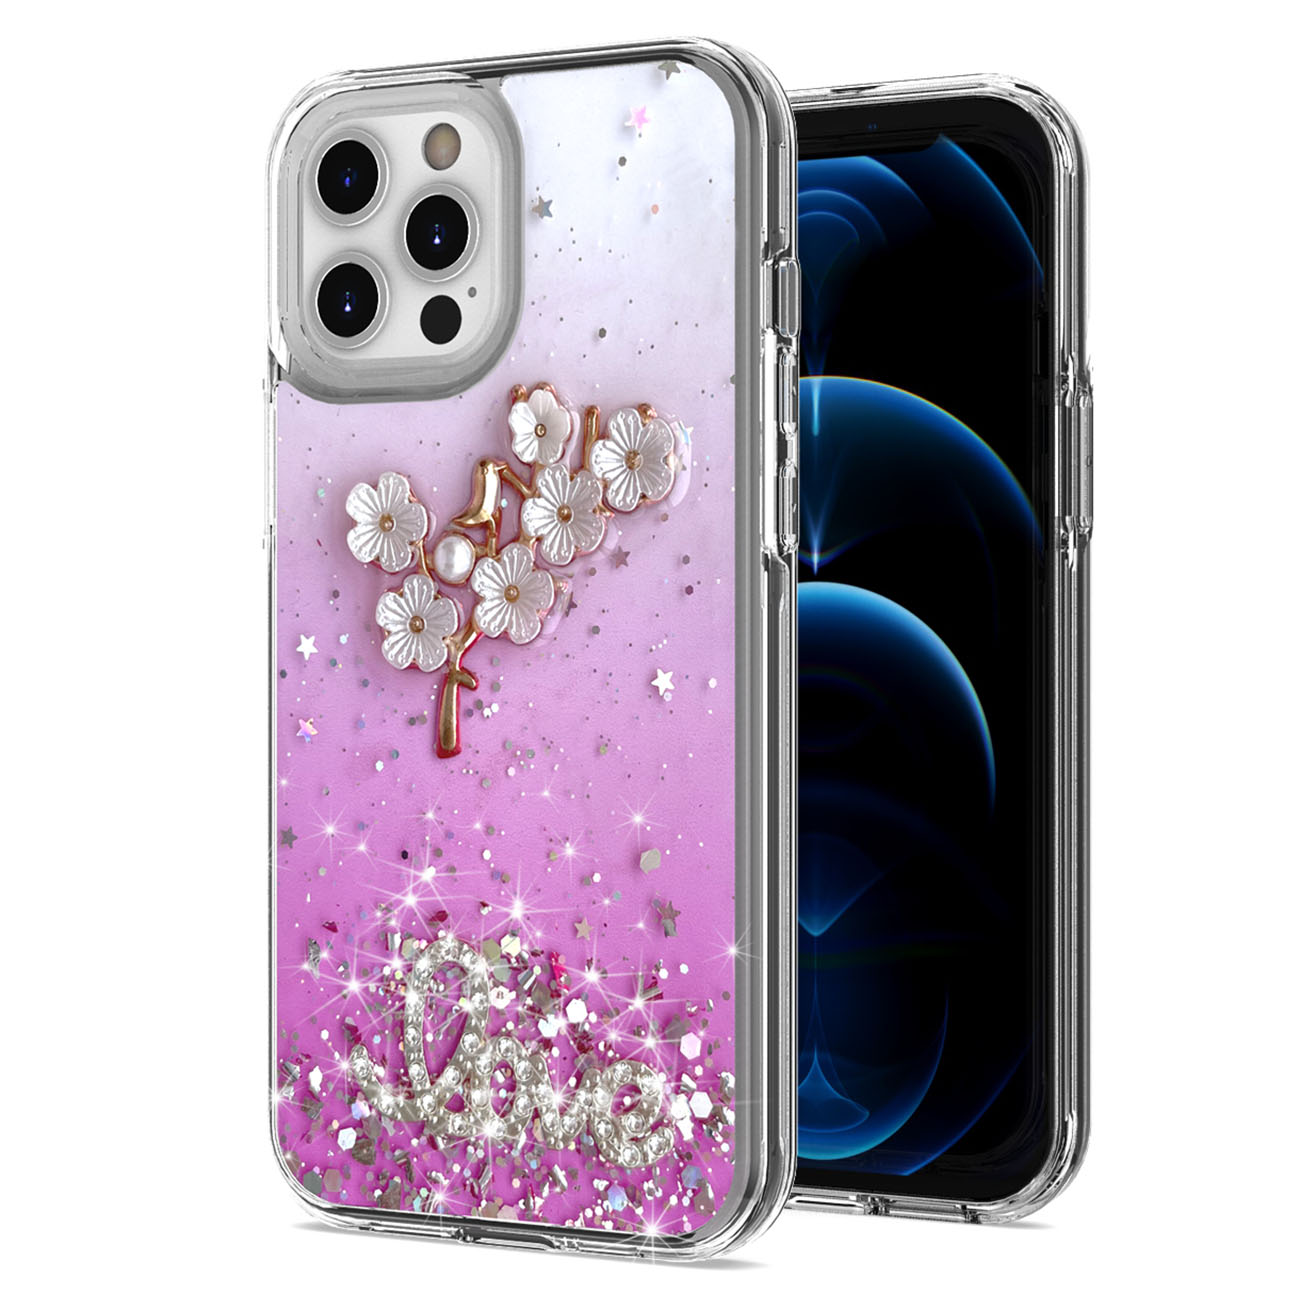 Jewel Glitter 3D Flower Love Crystal Armor Hybrid Case for Apple iPHONE 12 Pro Max (Pink)